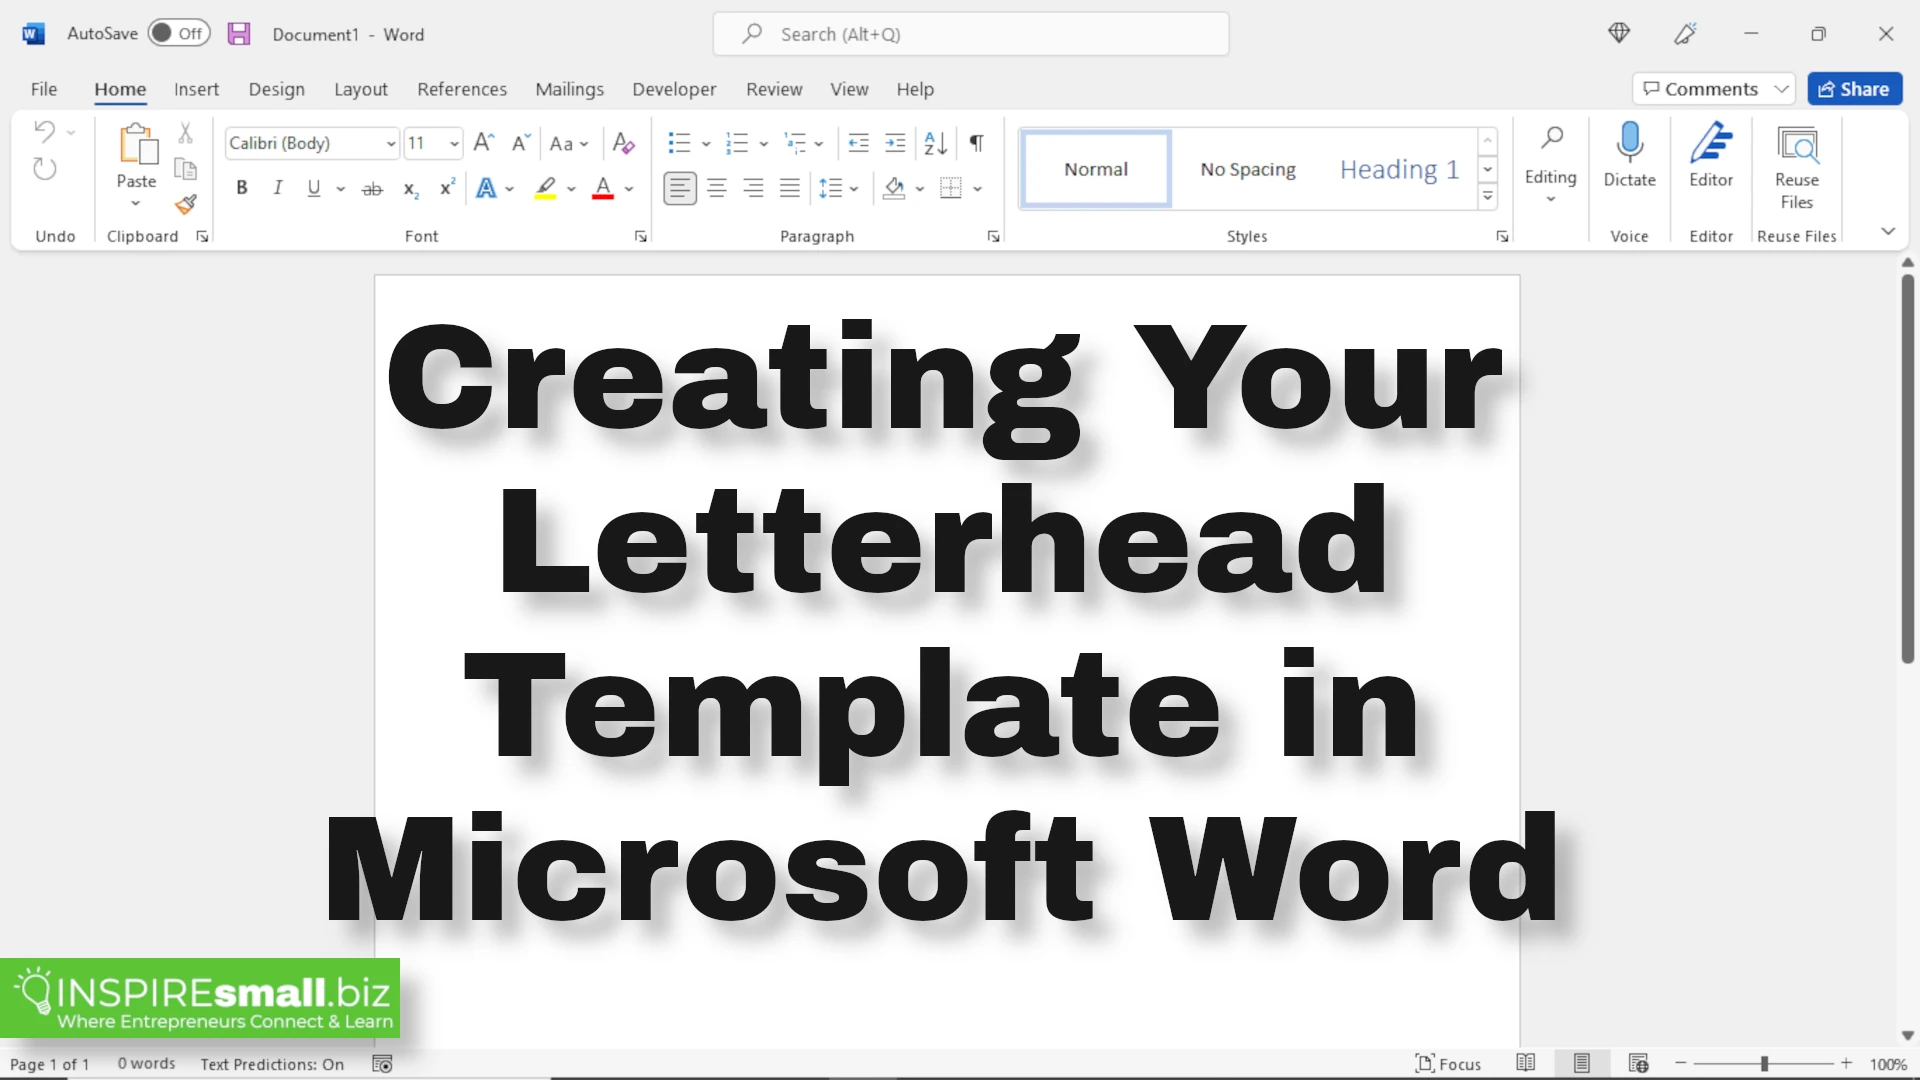 Creating Your Letterhead in Microsoft Word